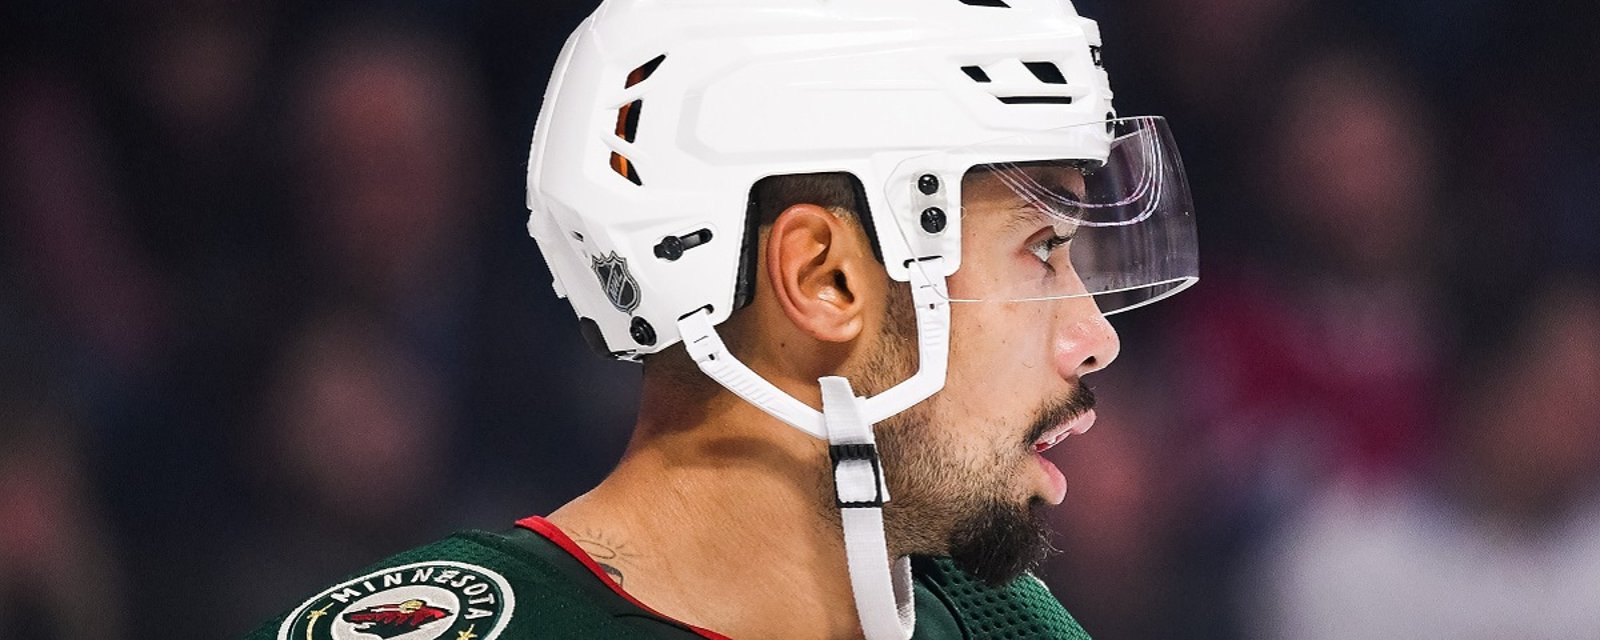 Early updates on Dumba and Johansson are not promising.